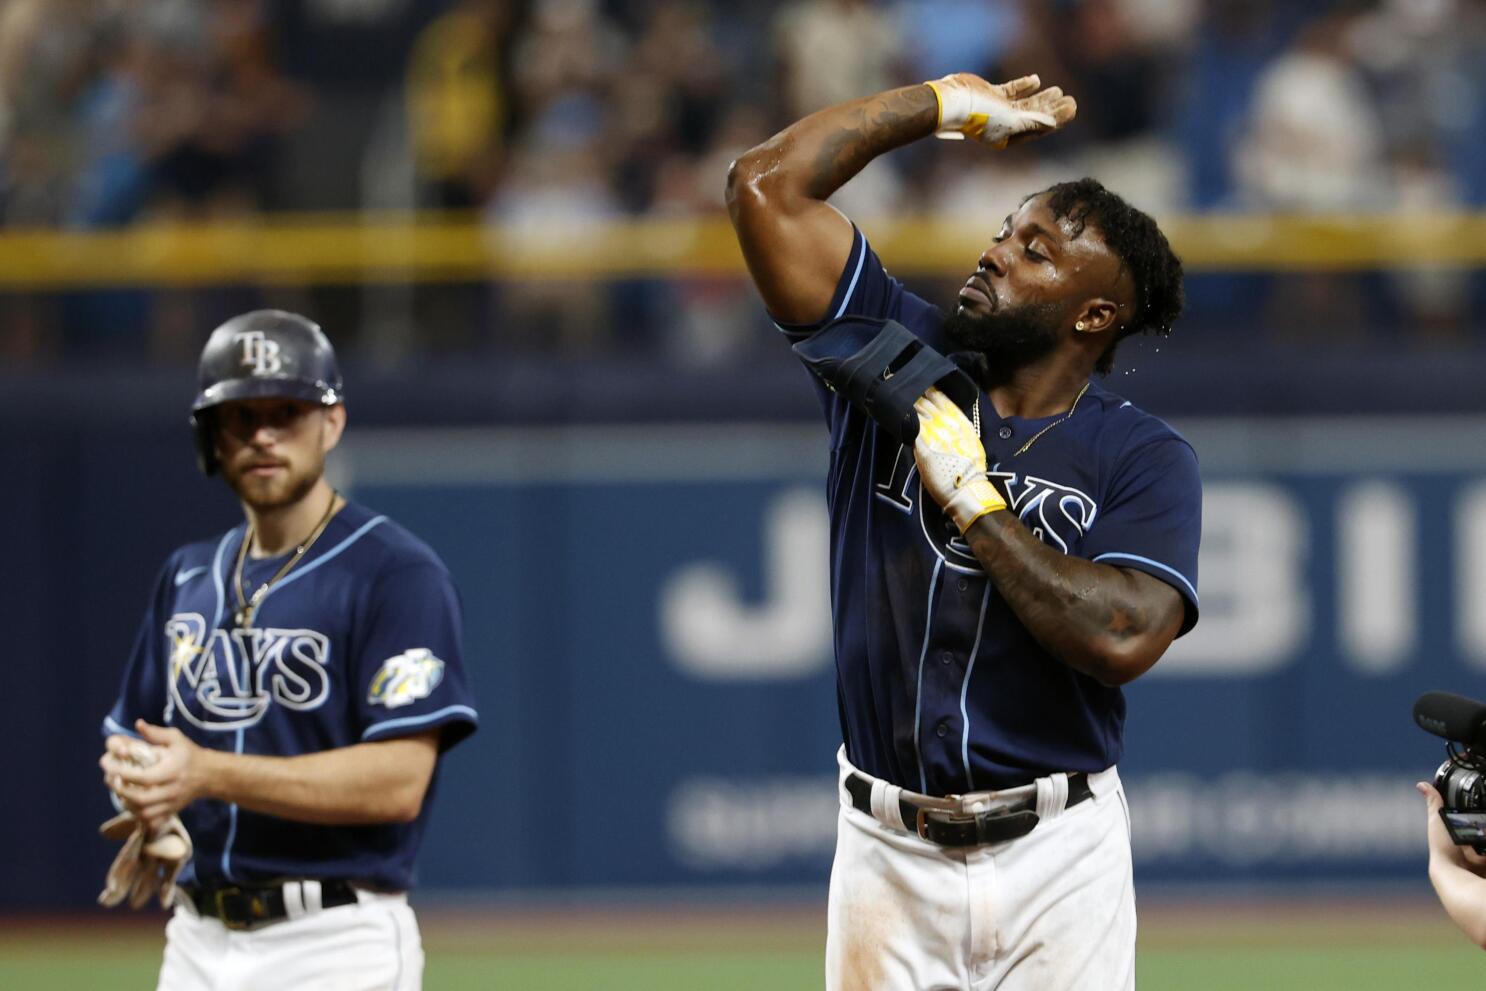 Tampa Bay Rays Tie MLB Record With 13 Straight Wins to Start the